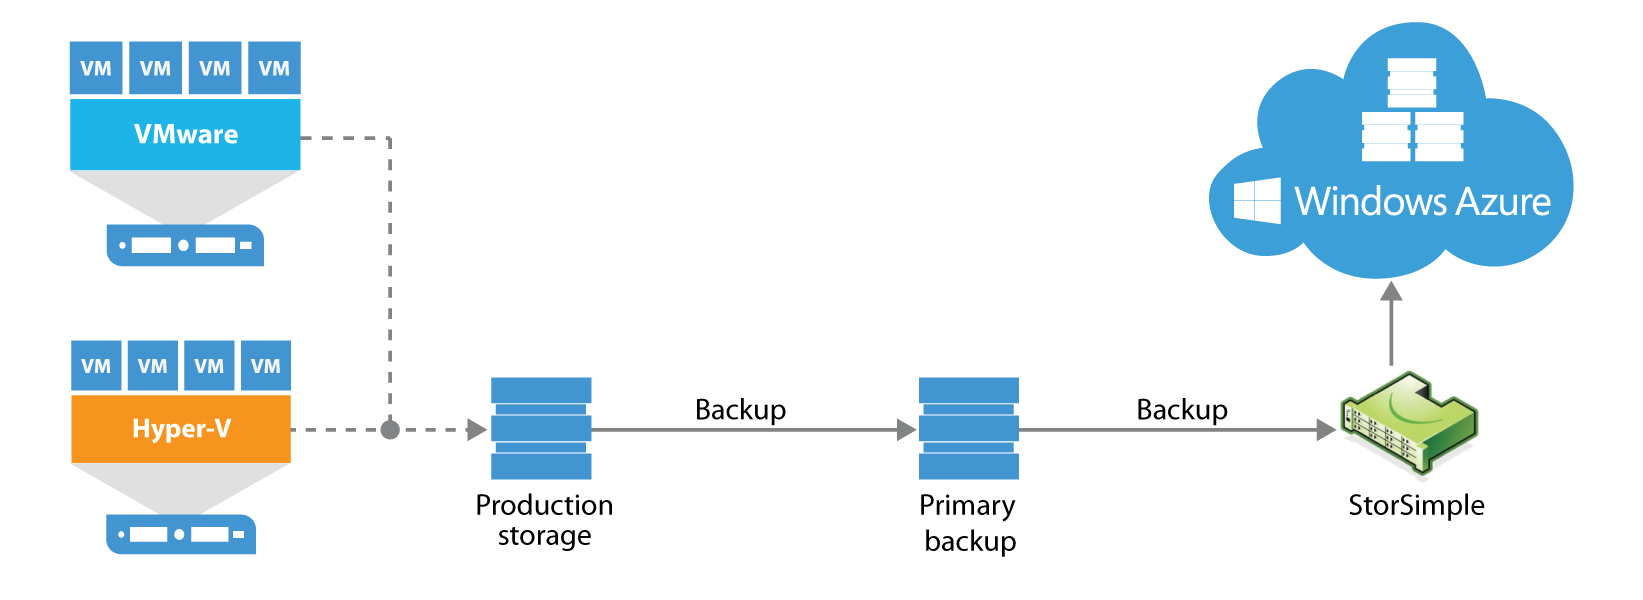 Using StorSimple as a backup target with Veeam [Image Credit: Veeam]